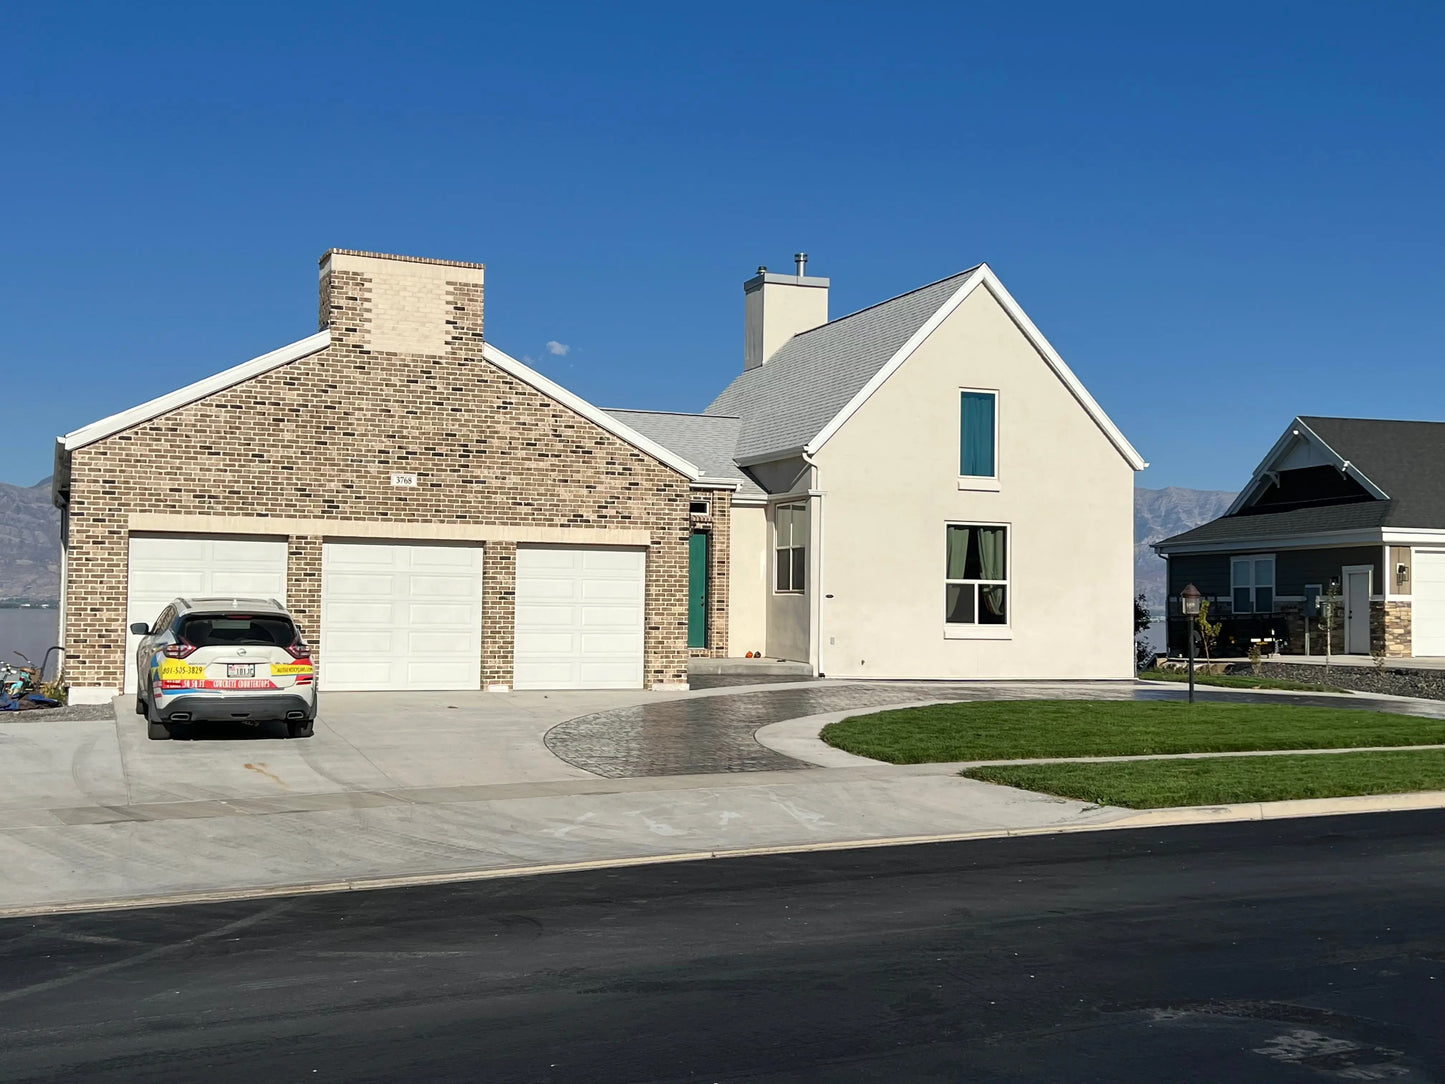 Bold Irish Vernacular design with charming features like tin ceilings, handmade details.